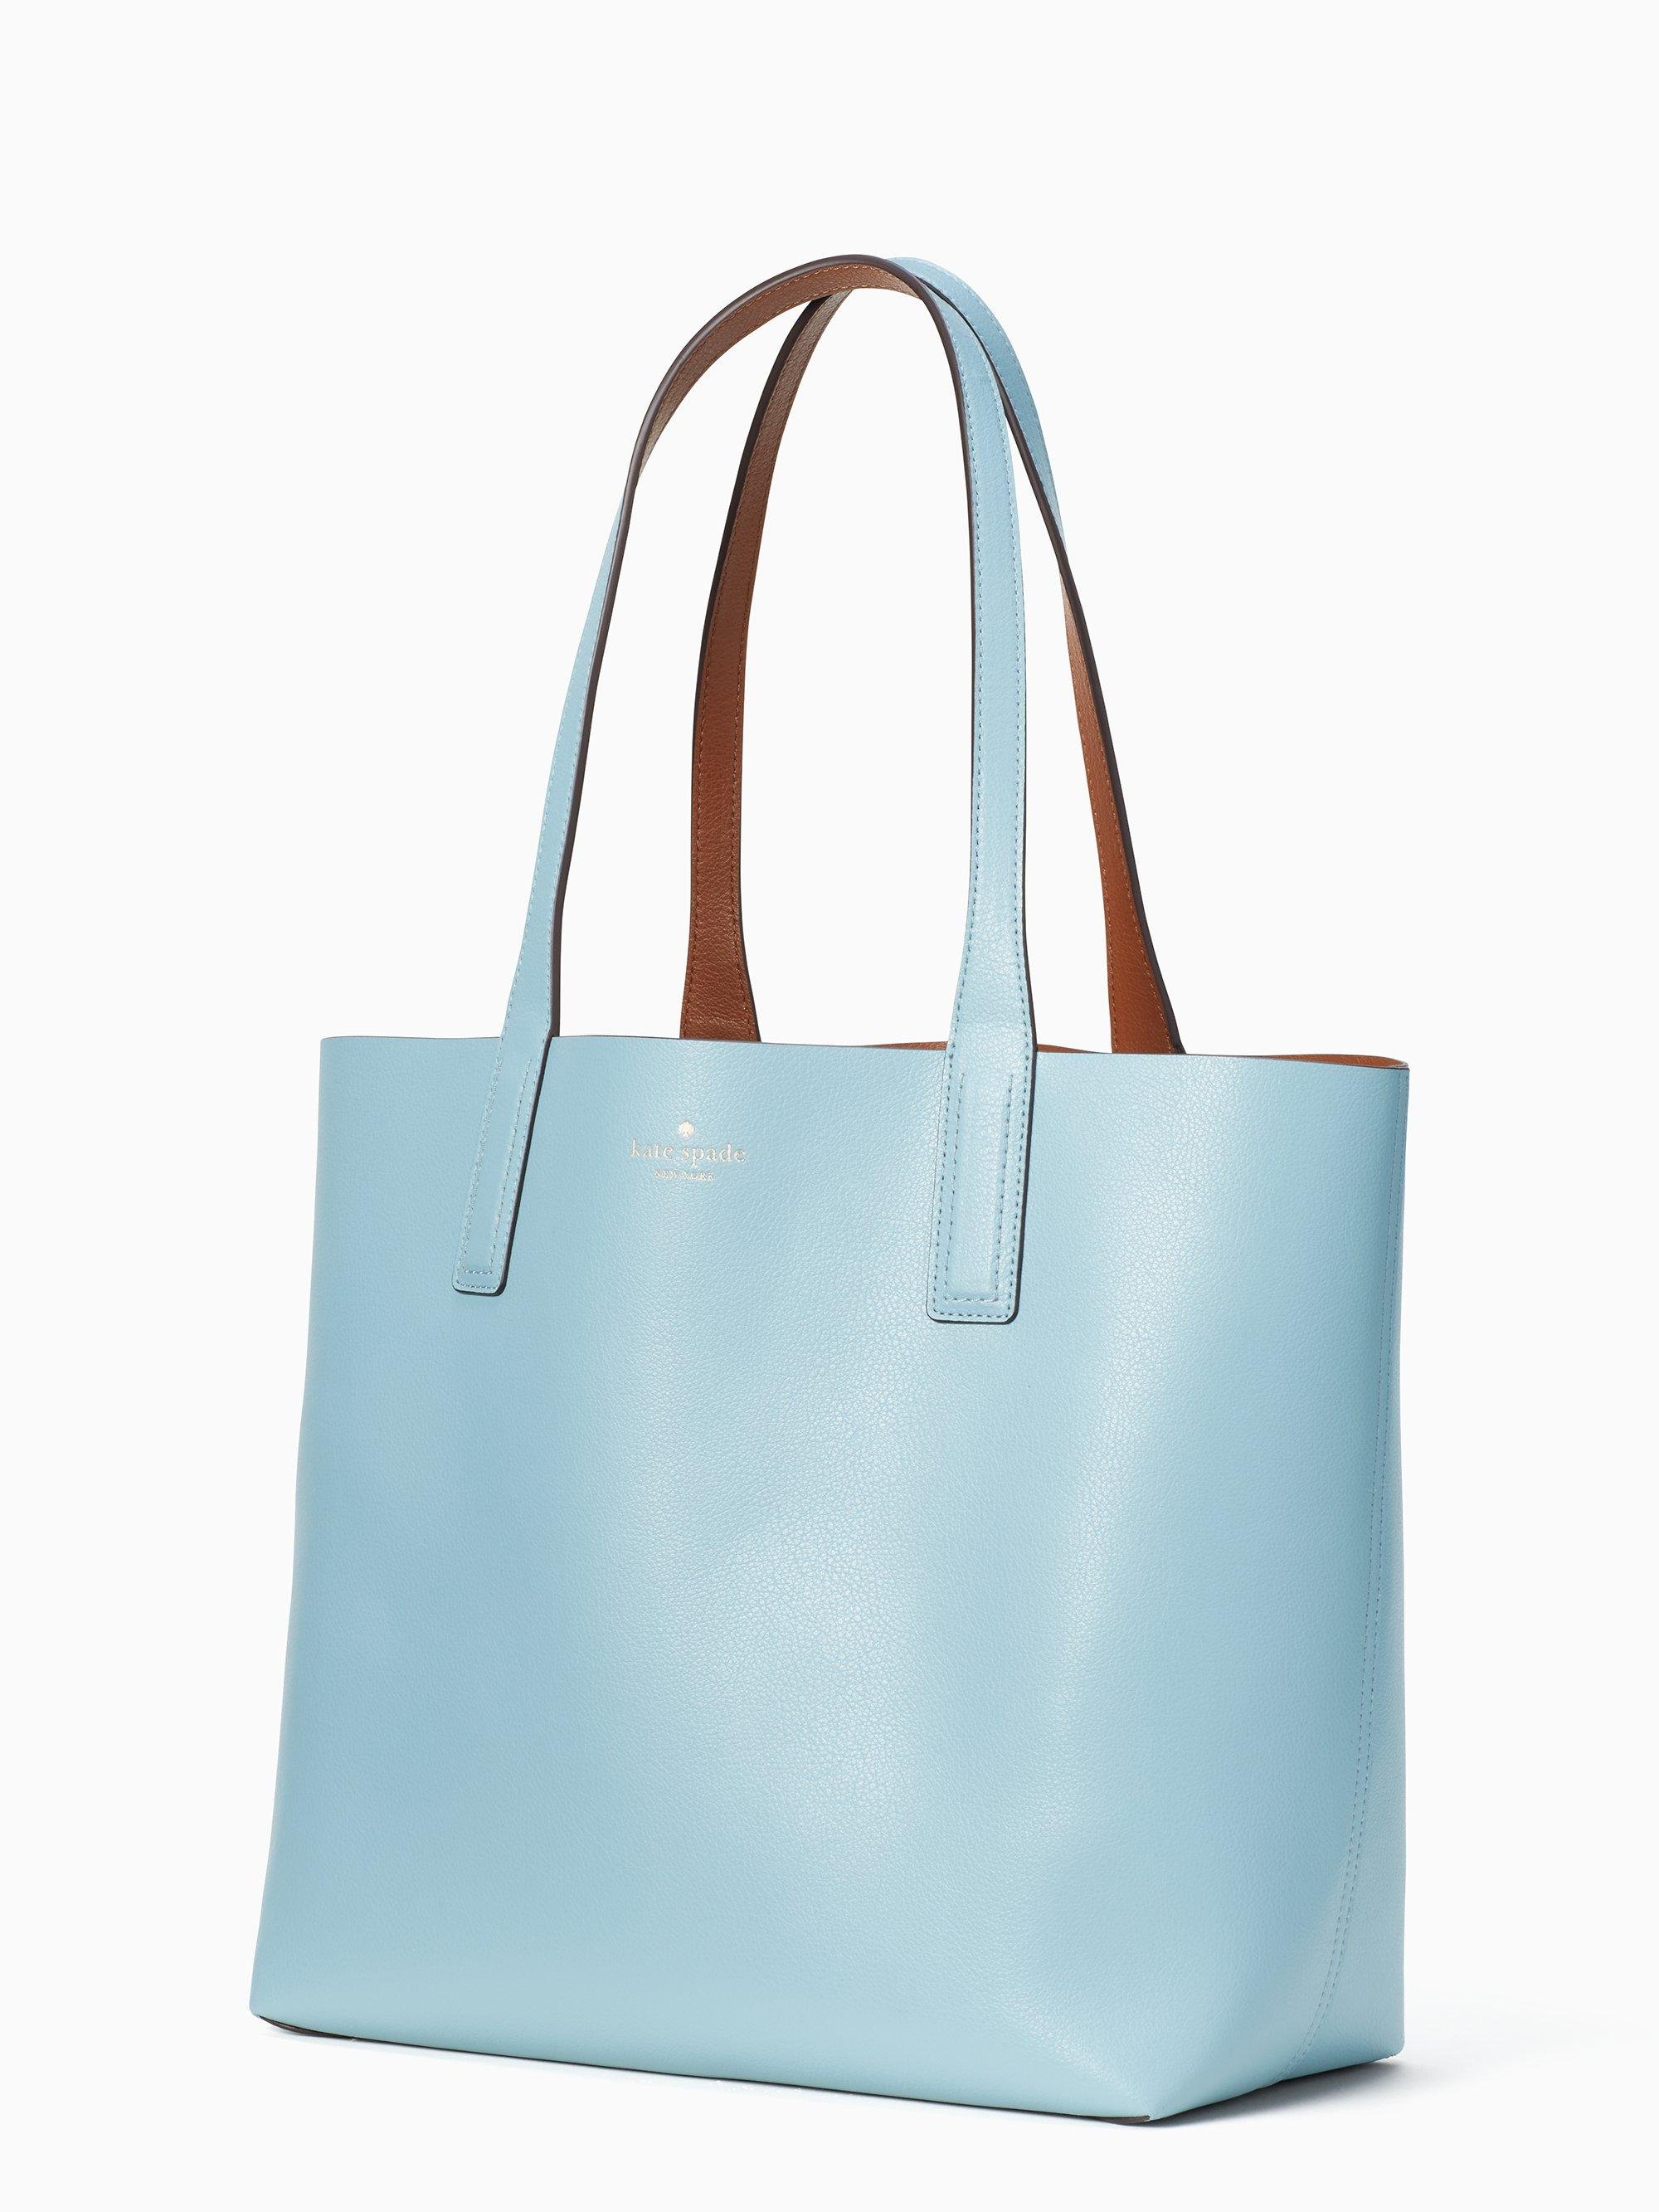 Kate Spade Arch Reversible Tote in Blue - Lyst